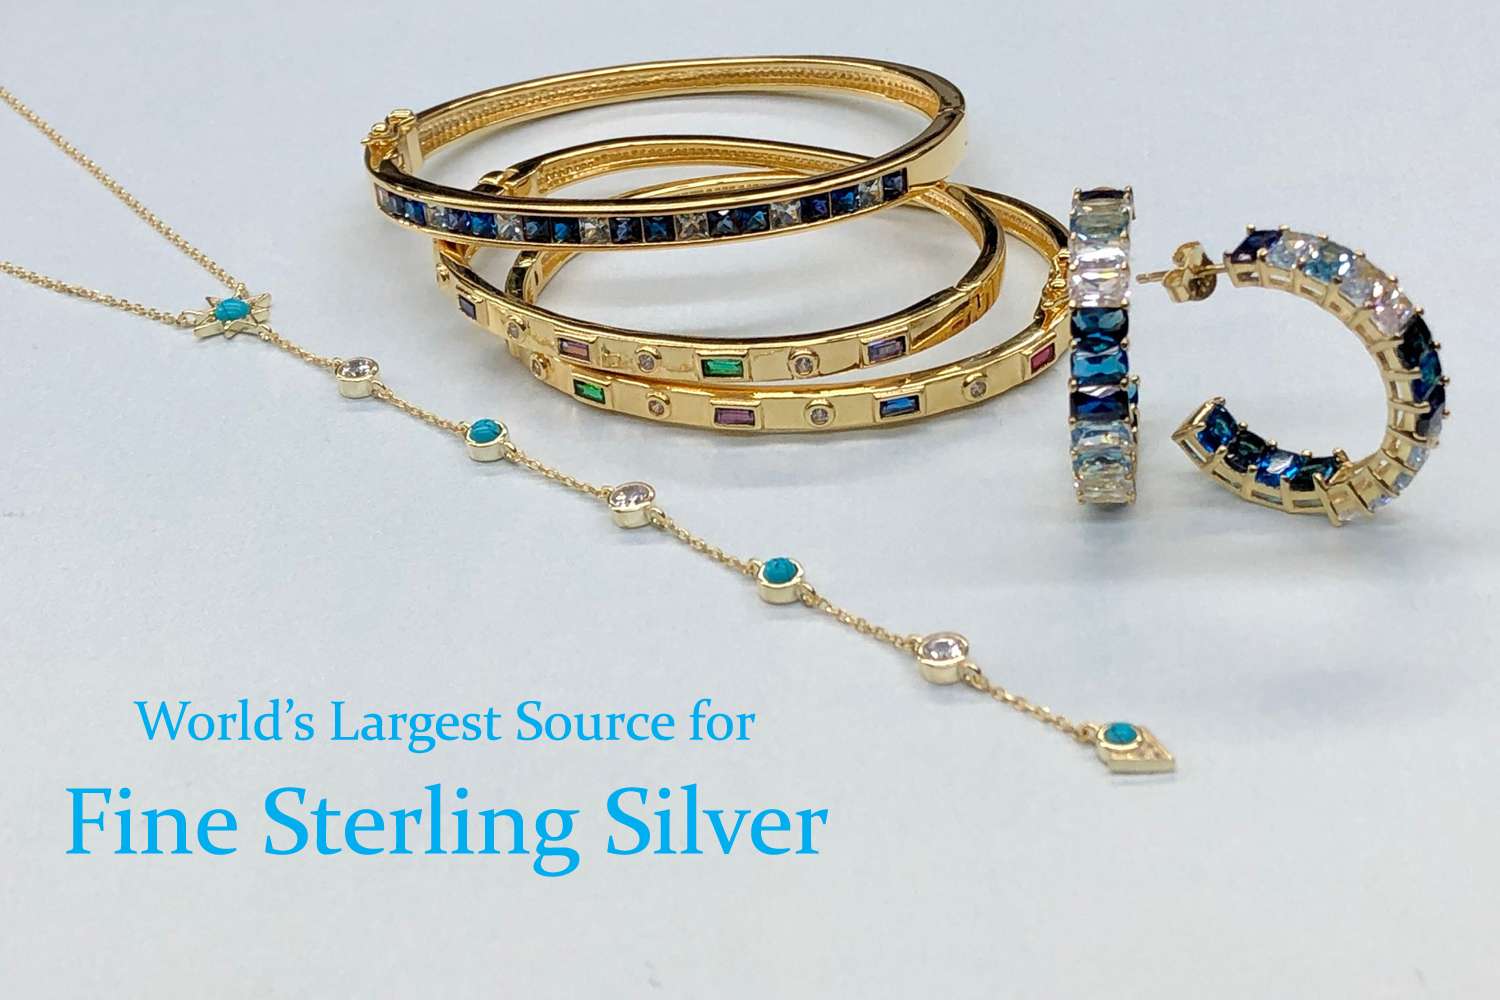 Wholesale Sterling Silver Jewelry, 925 Silver Jewelry New York